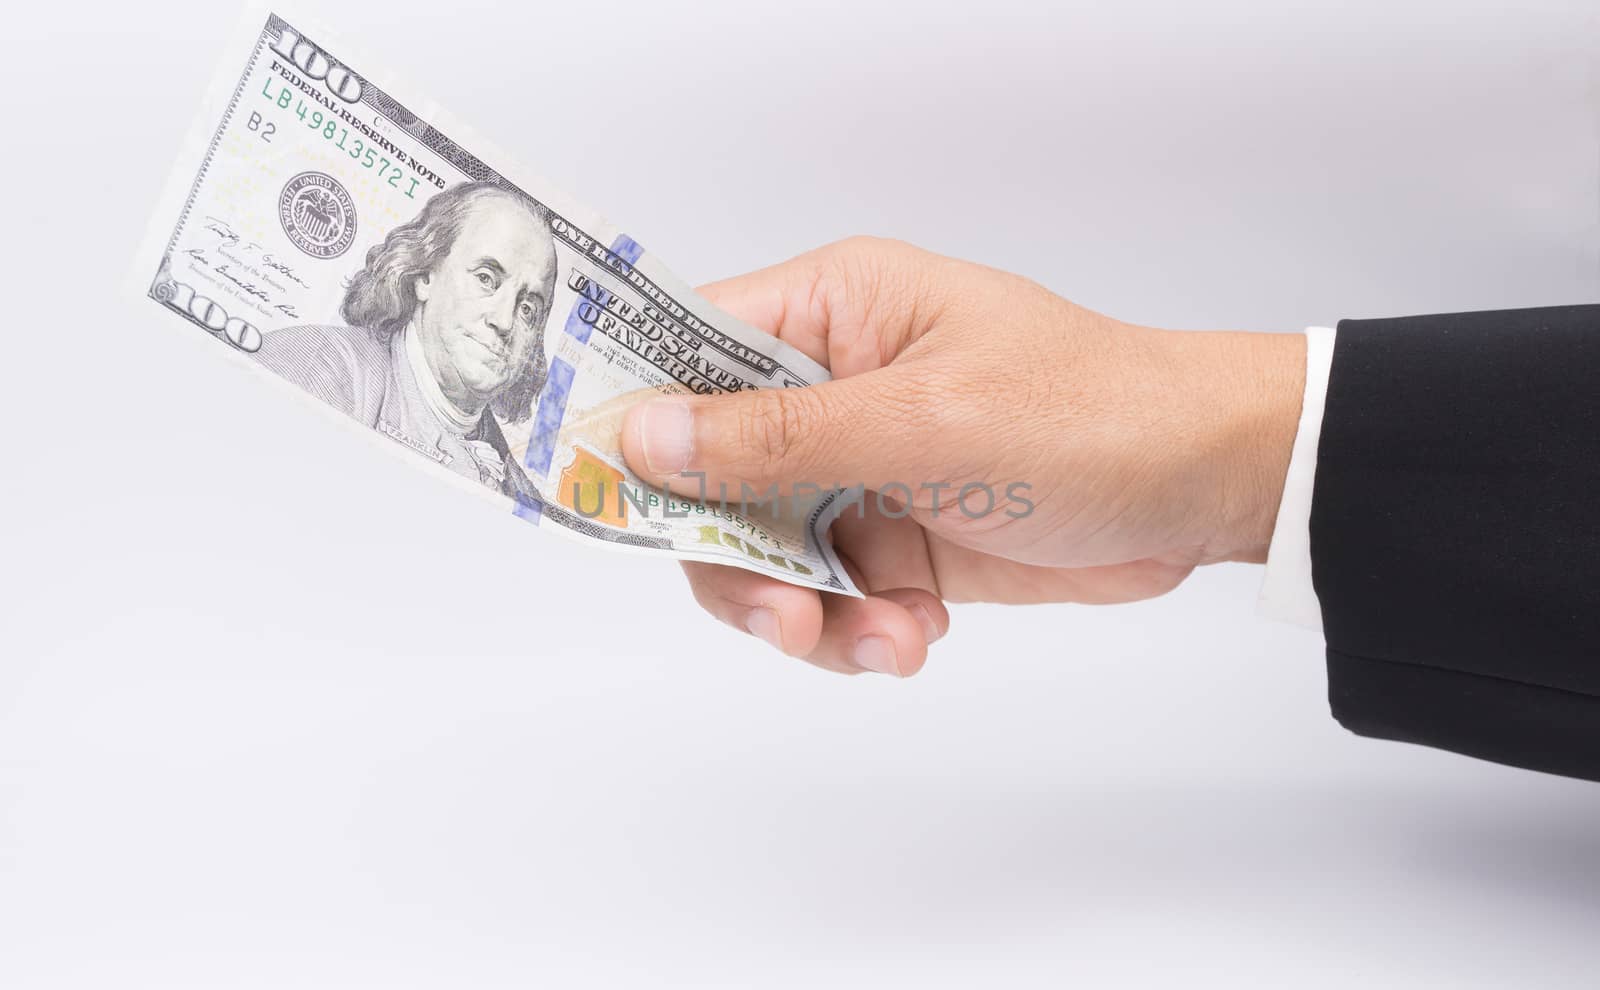 US dollars in business hand isolated on a white background by frank600